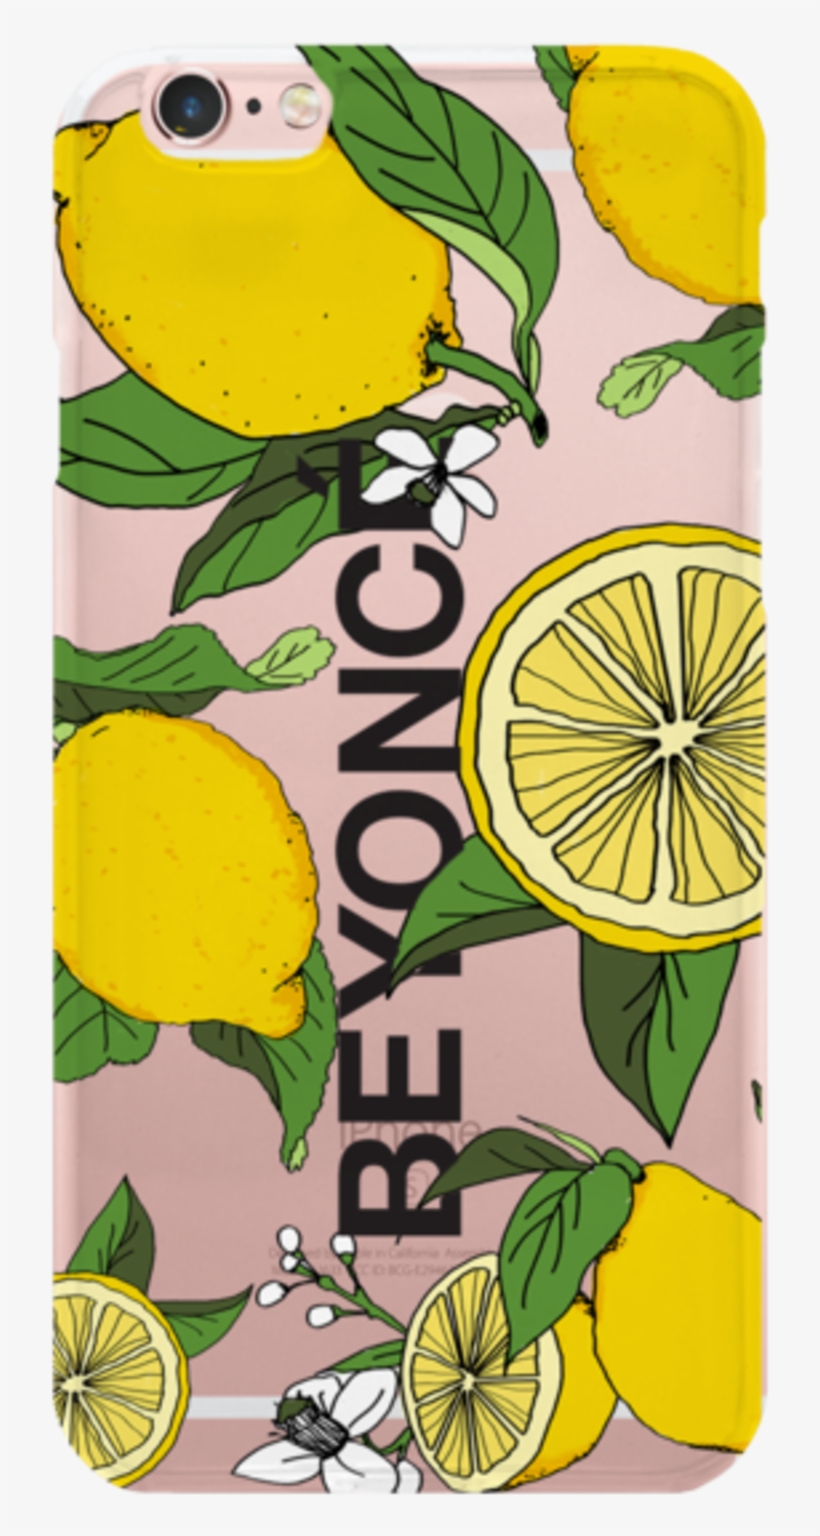 Who Wouldn't Want To Walk Around Sporting Queen Bey's - Beyonce Phone Case, transparent png #1837944